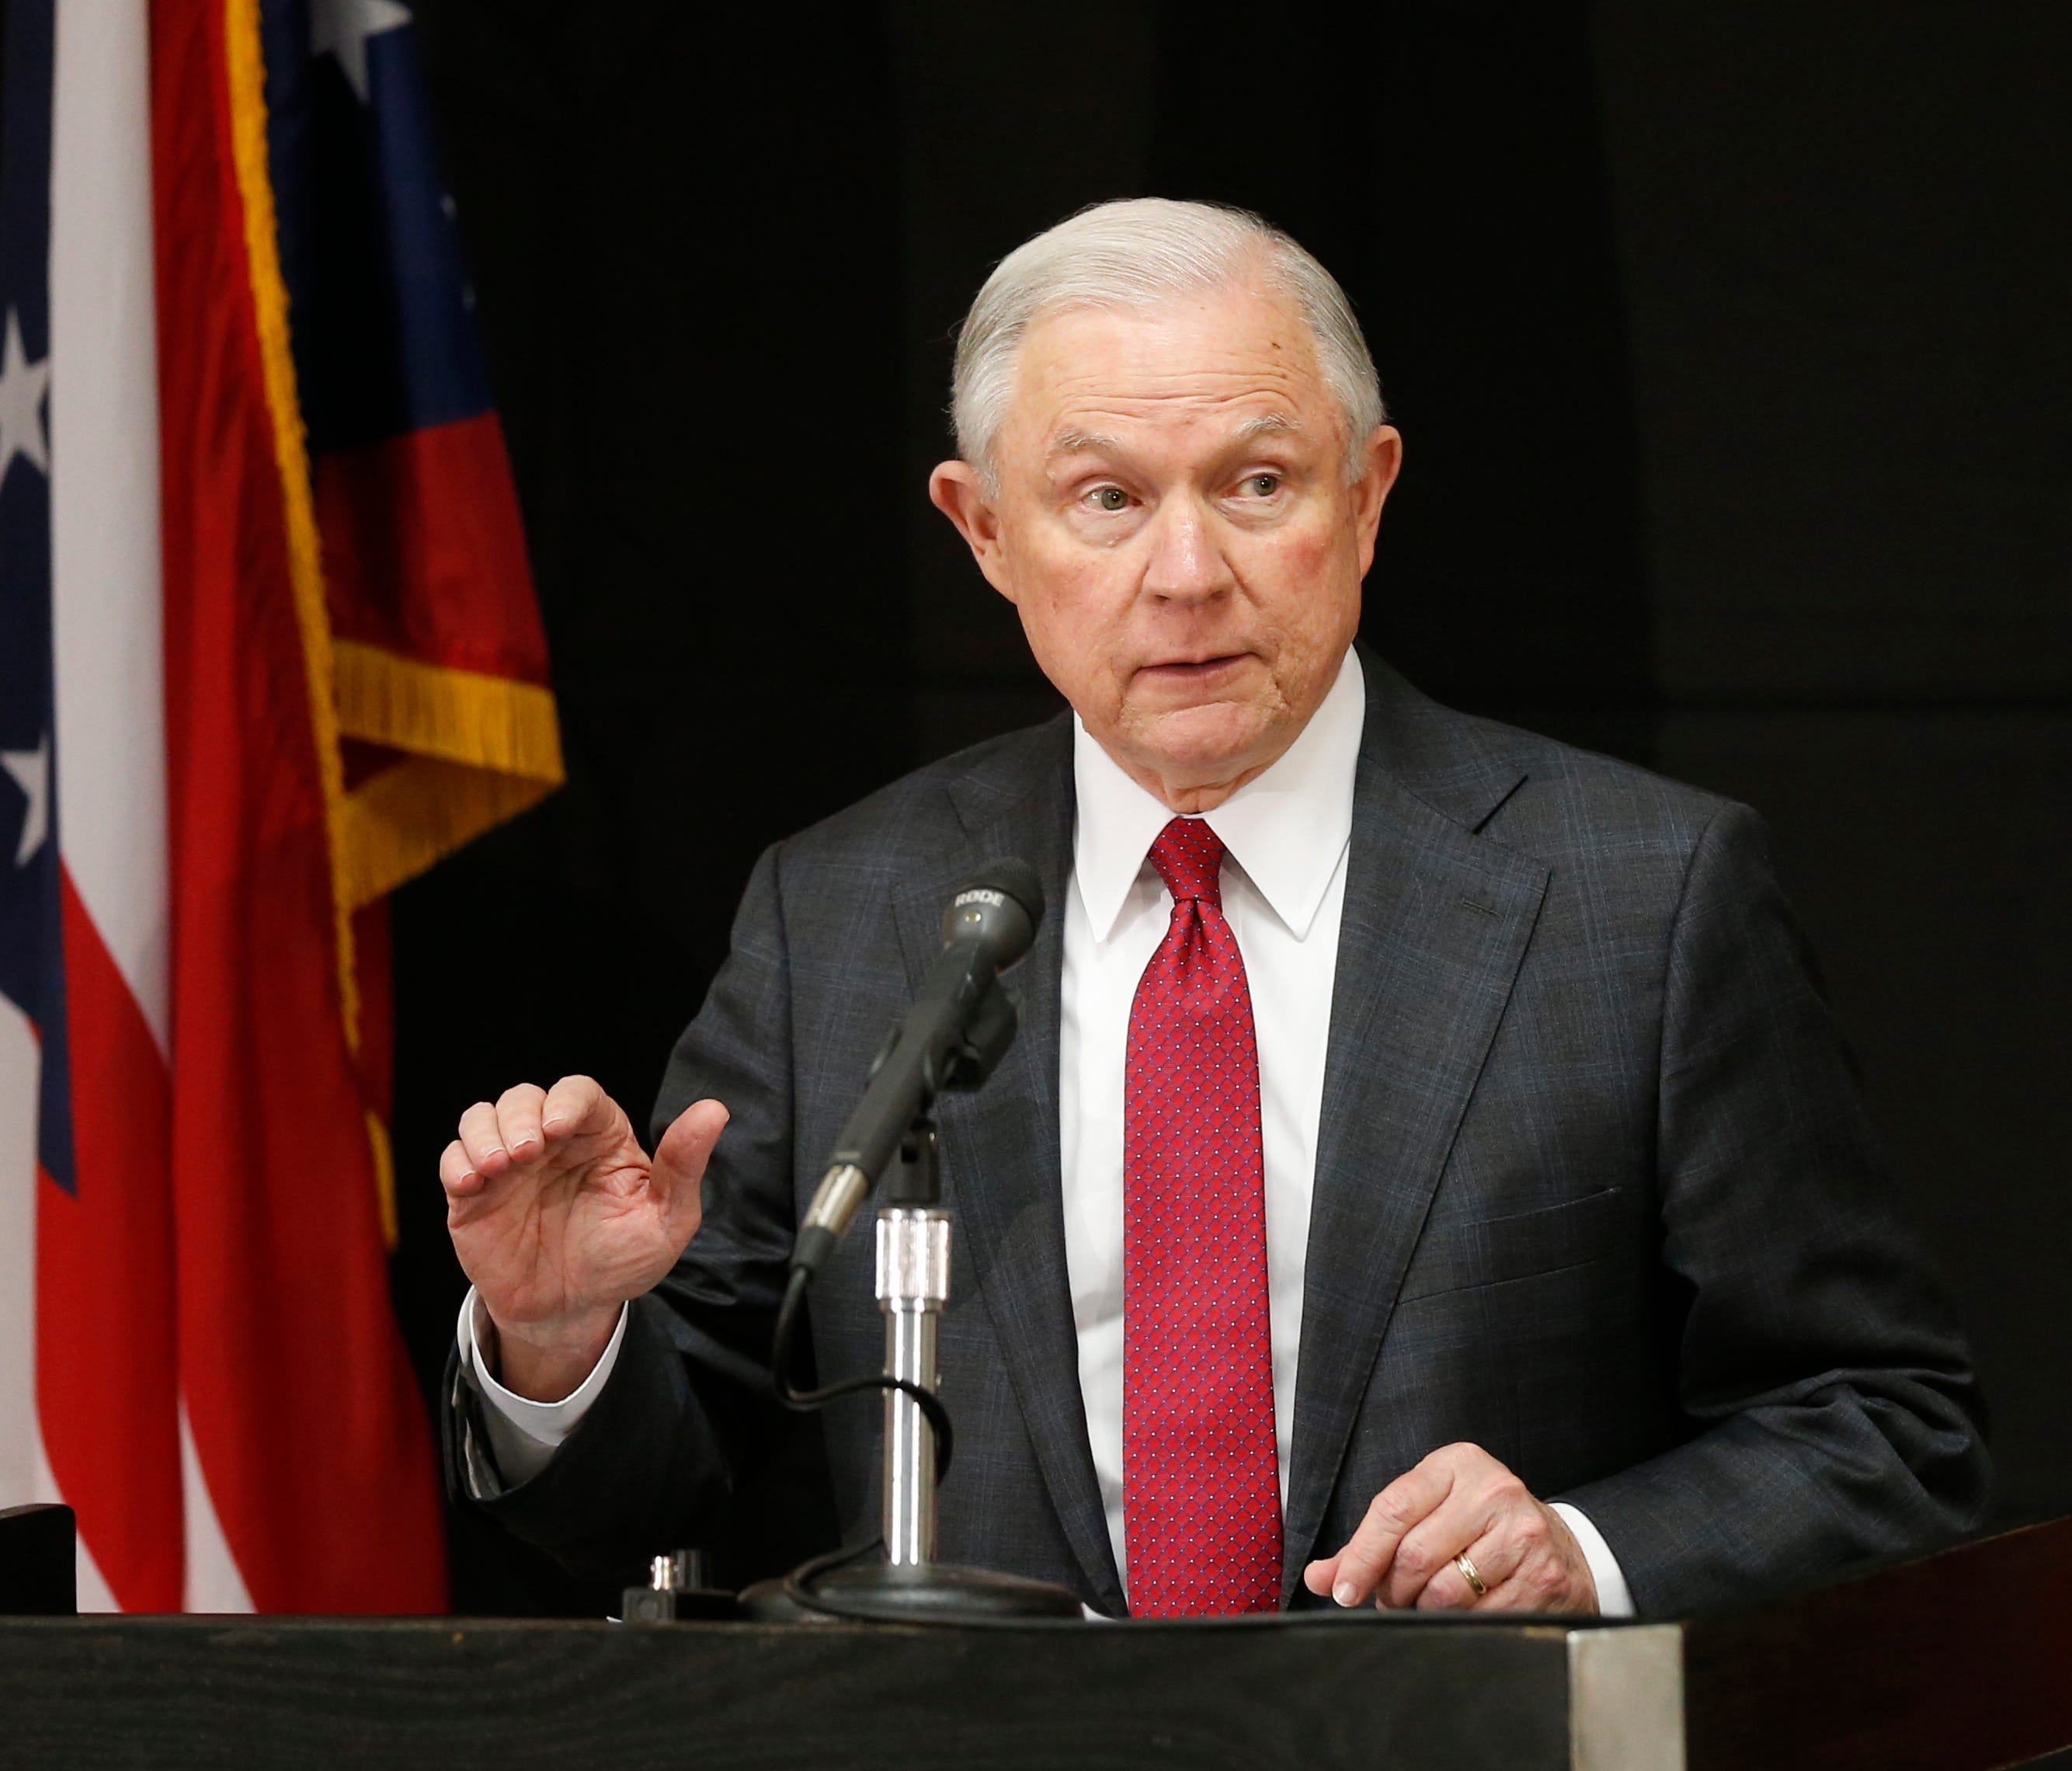 Attorney General Jeff Sessions is pictured speaking at the Columbus Police Academy.